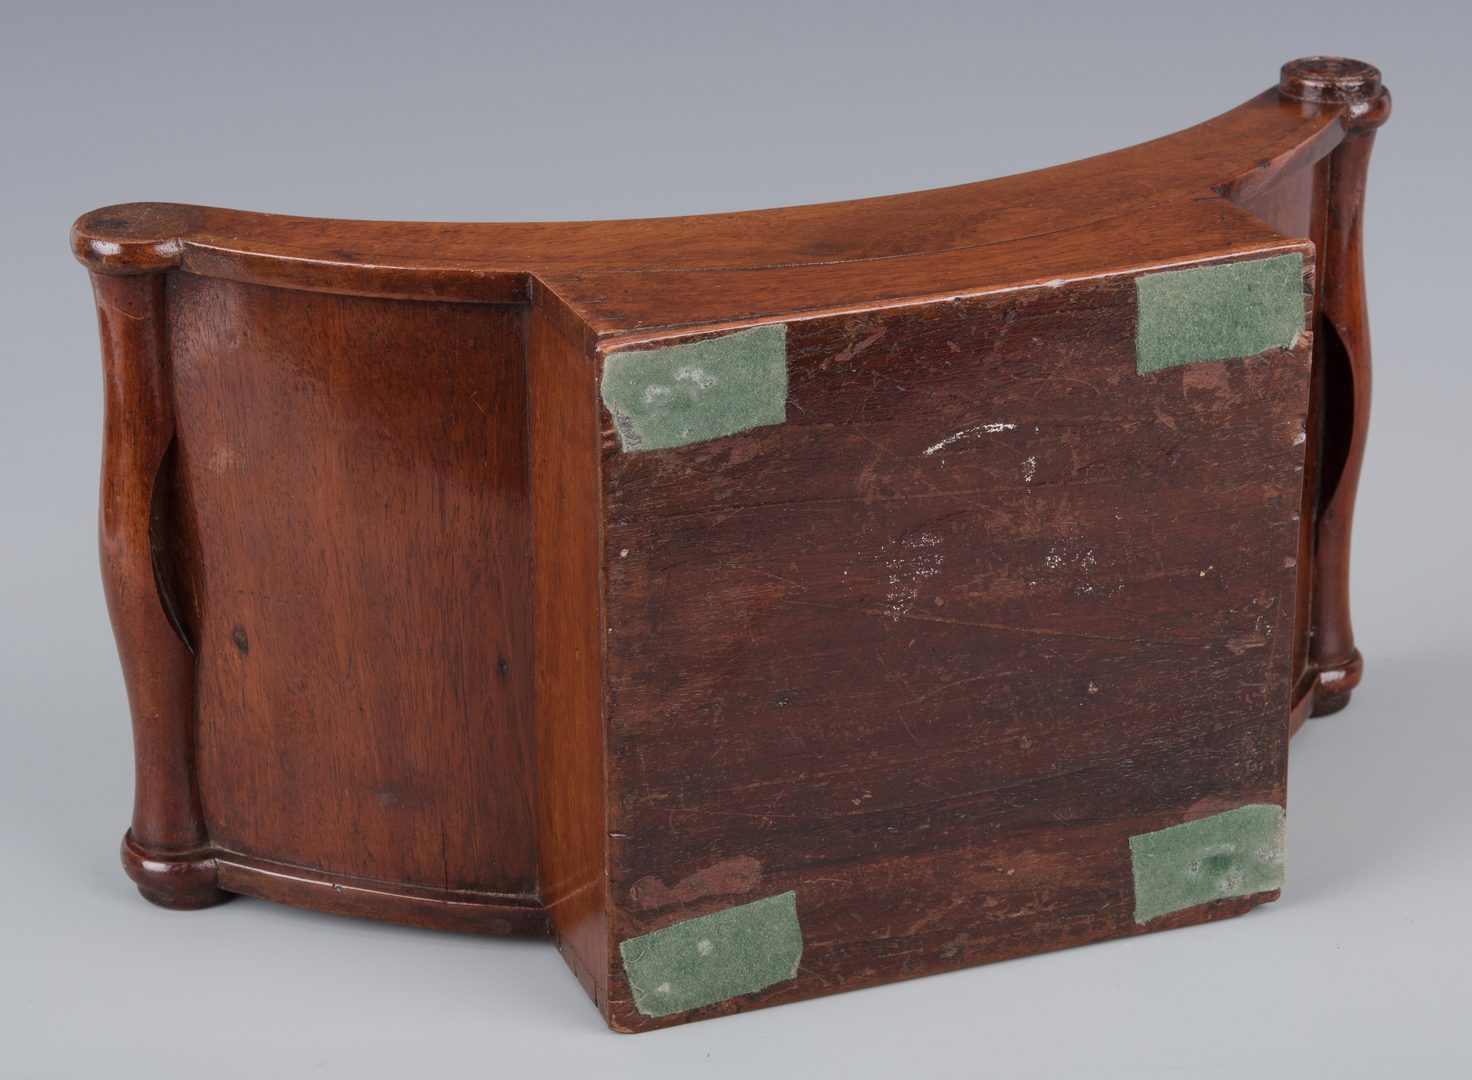 Lot 143: Tea Caddy, Cheese Coaster, and Classical Urns